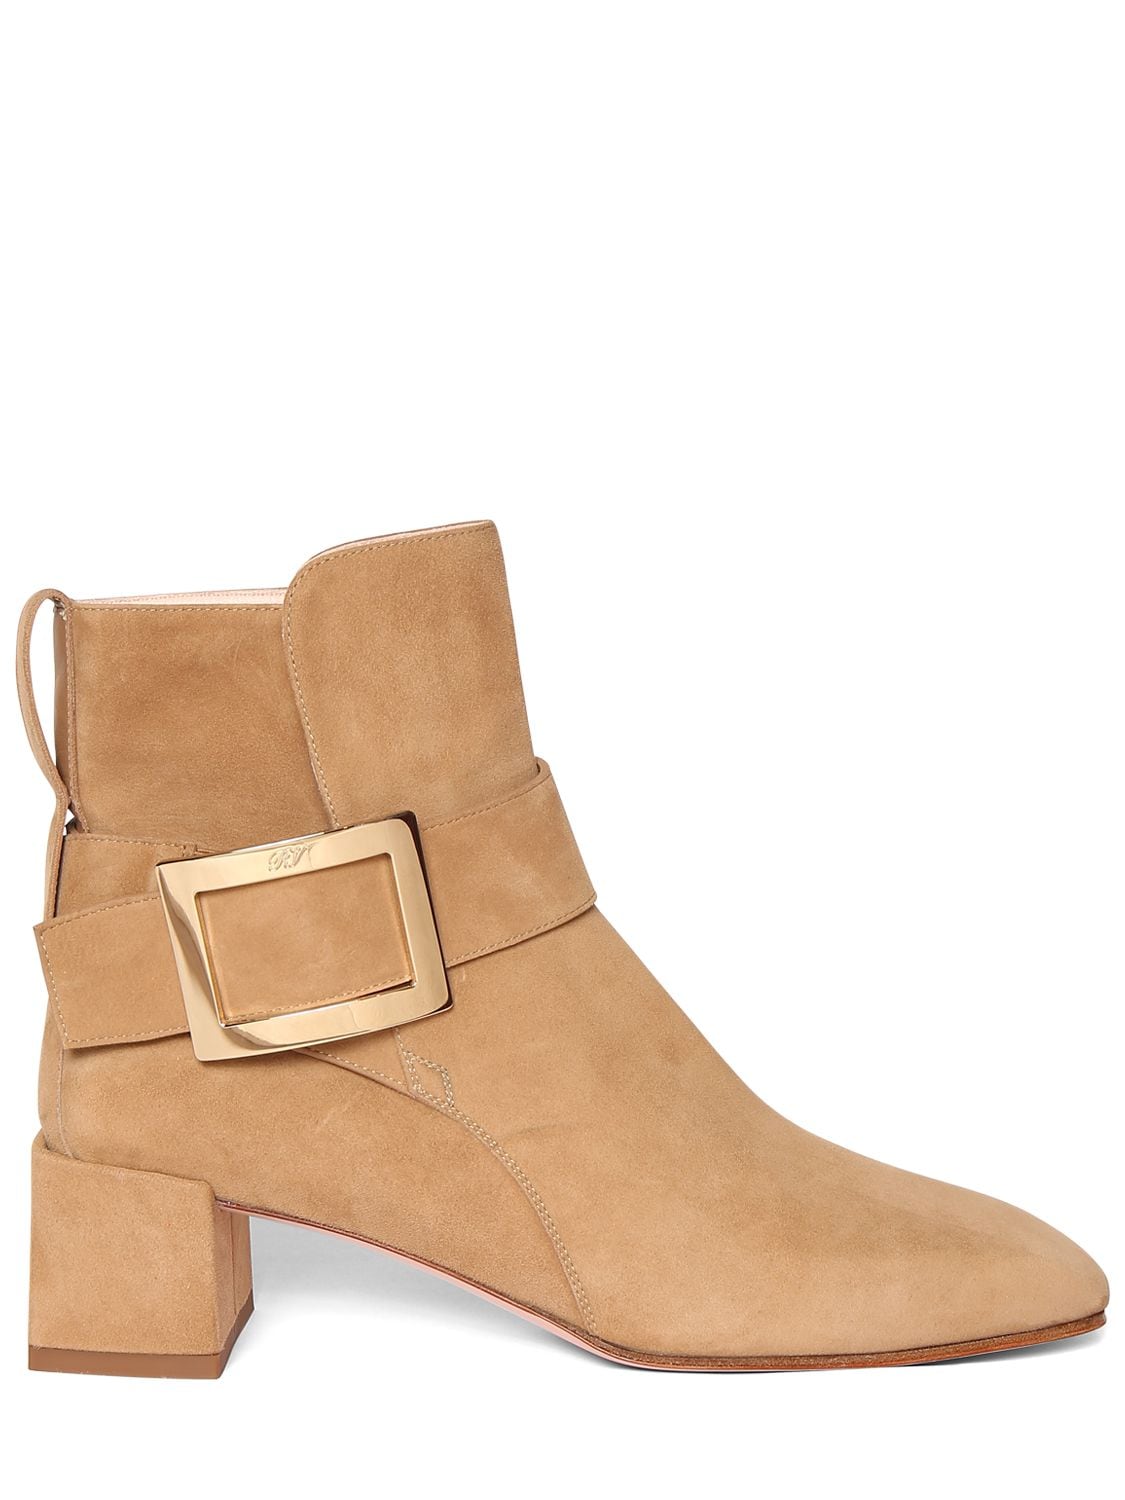 ROGER VIVIER 45MM CITY SUEDE ANKLE BOOTS